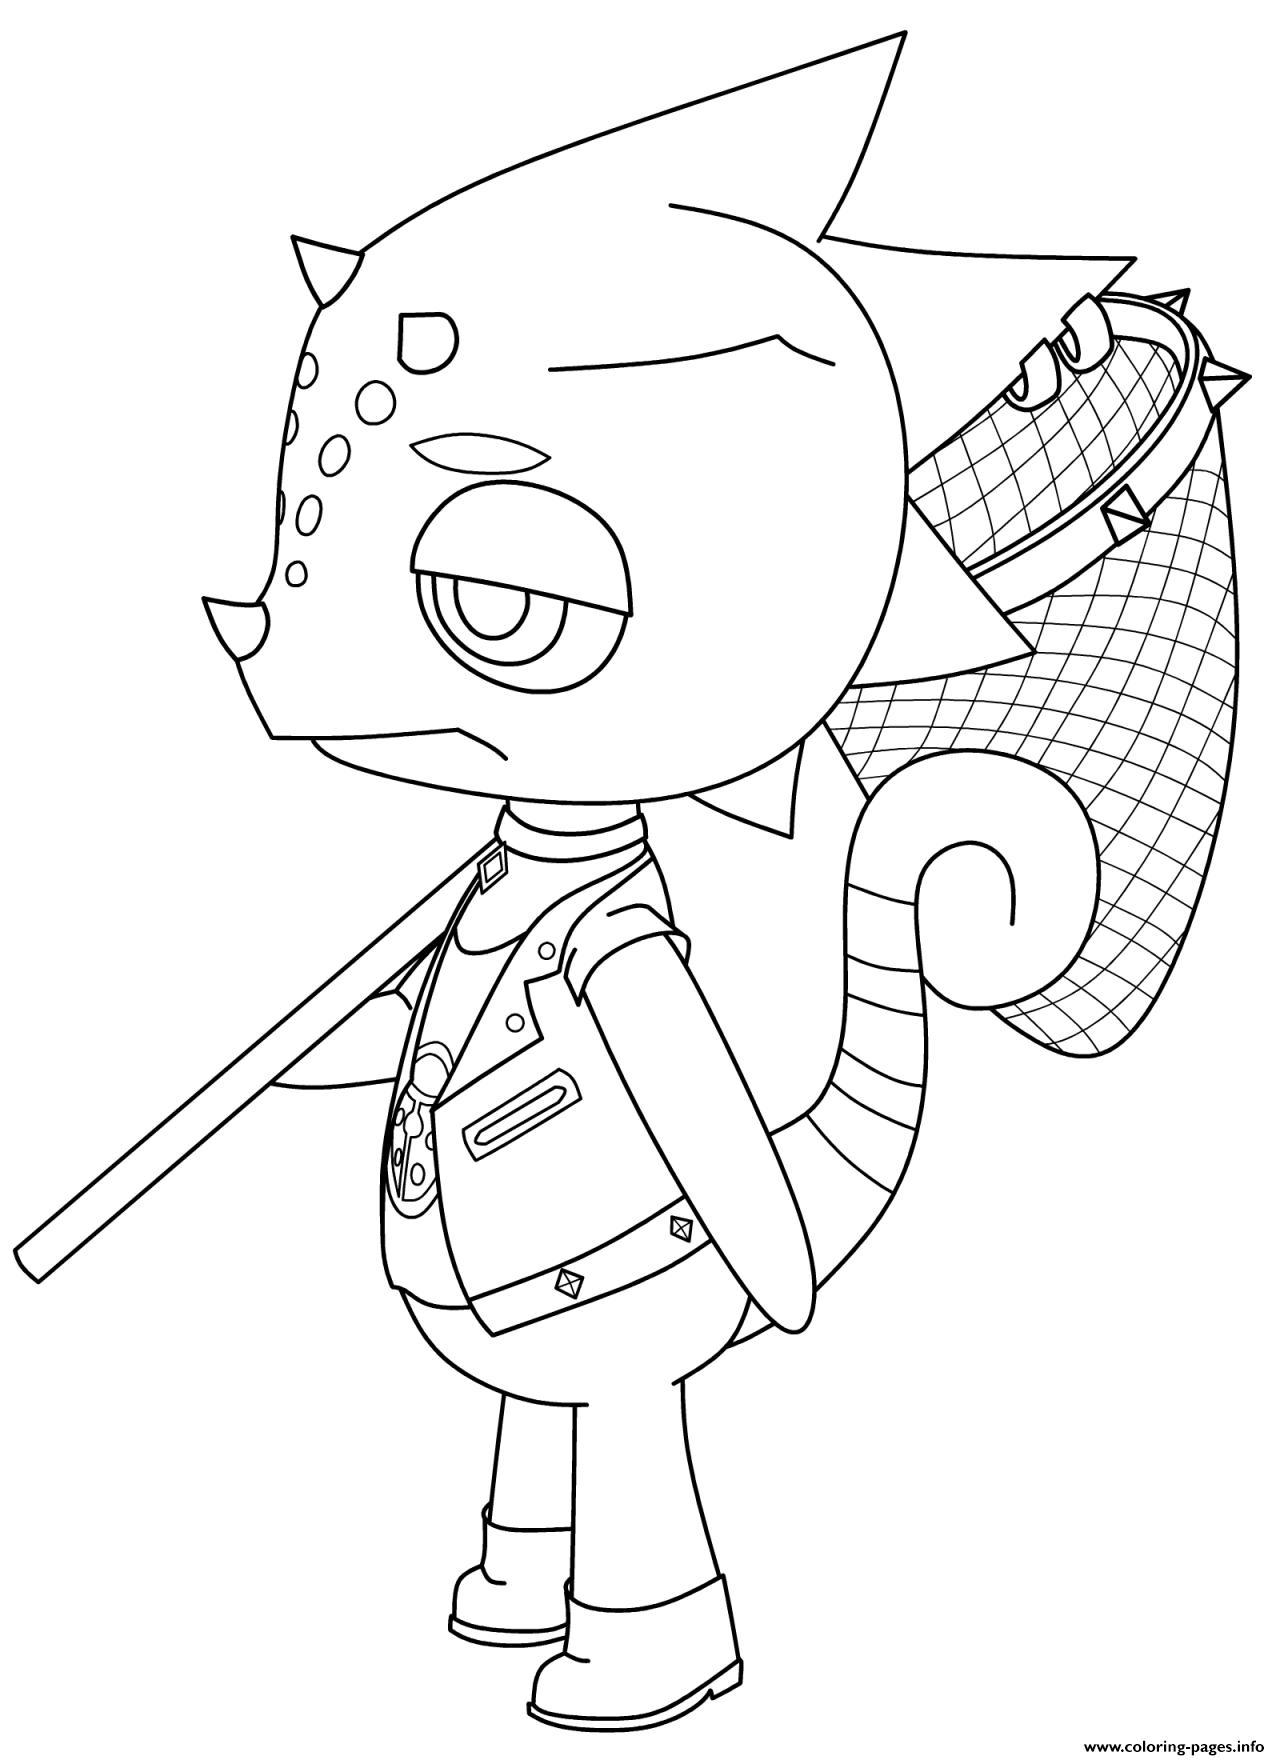 Fan Art Animal Fishing Coloring Pages Printable